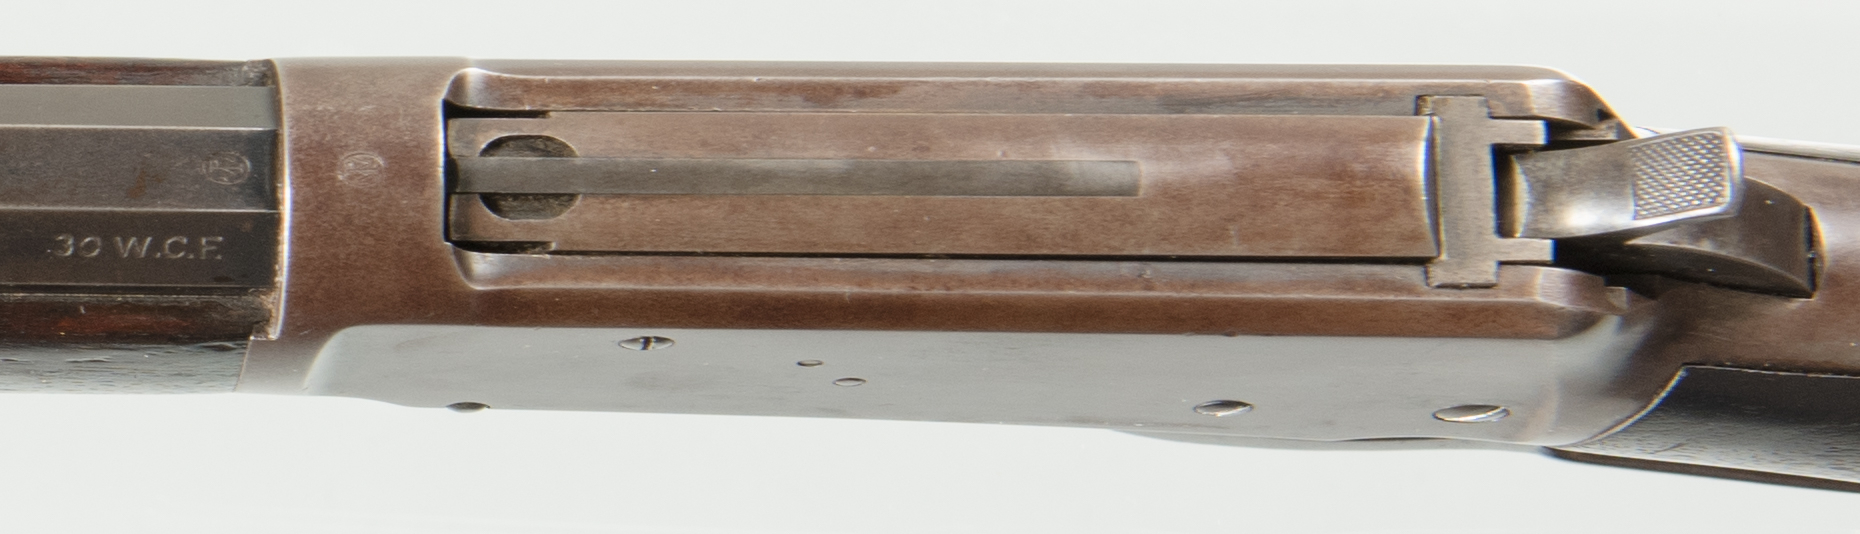 Lot 803: Winchester Model 1894, 30-30 Win Lever Action Rifle